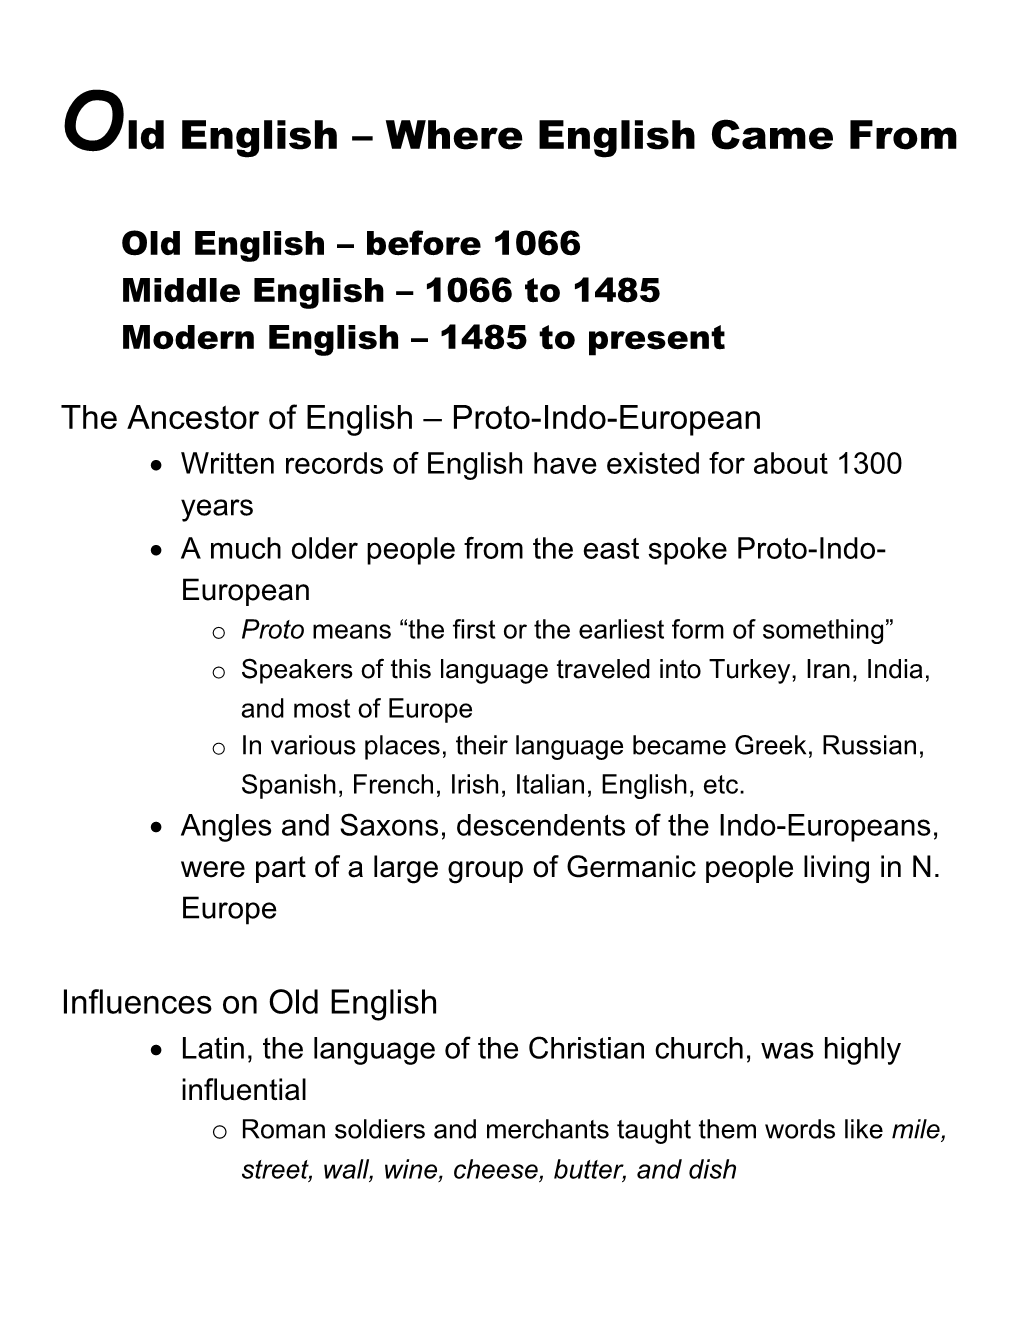 Old English: Where English Came From